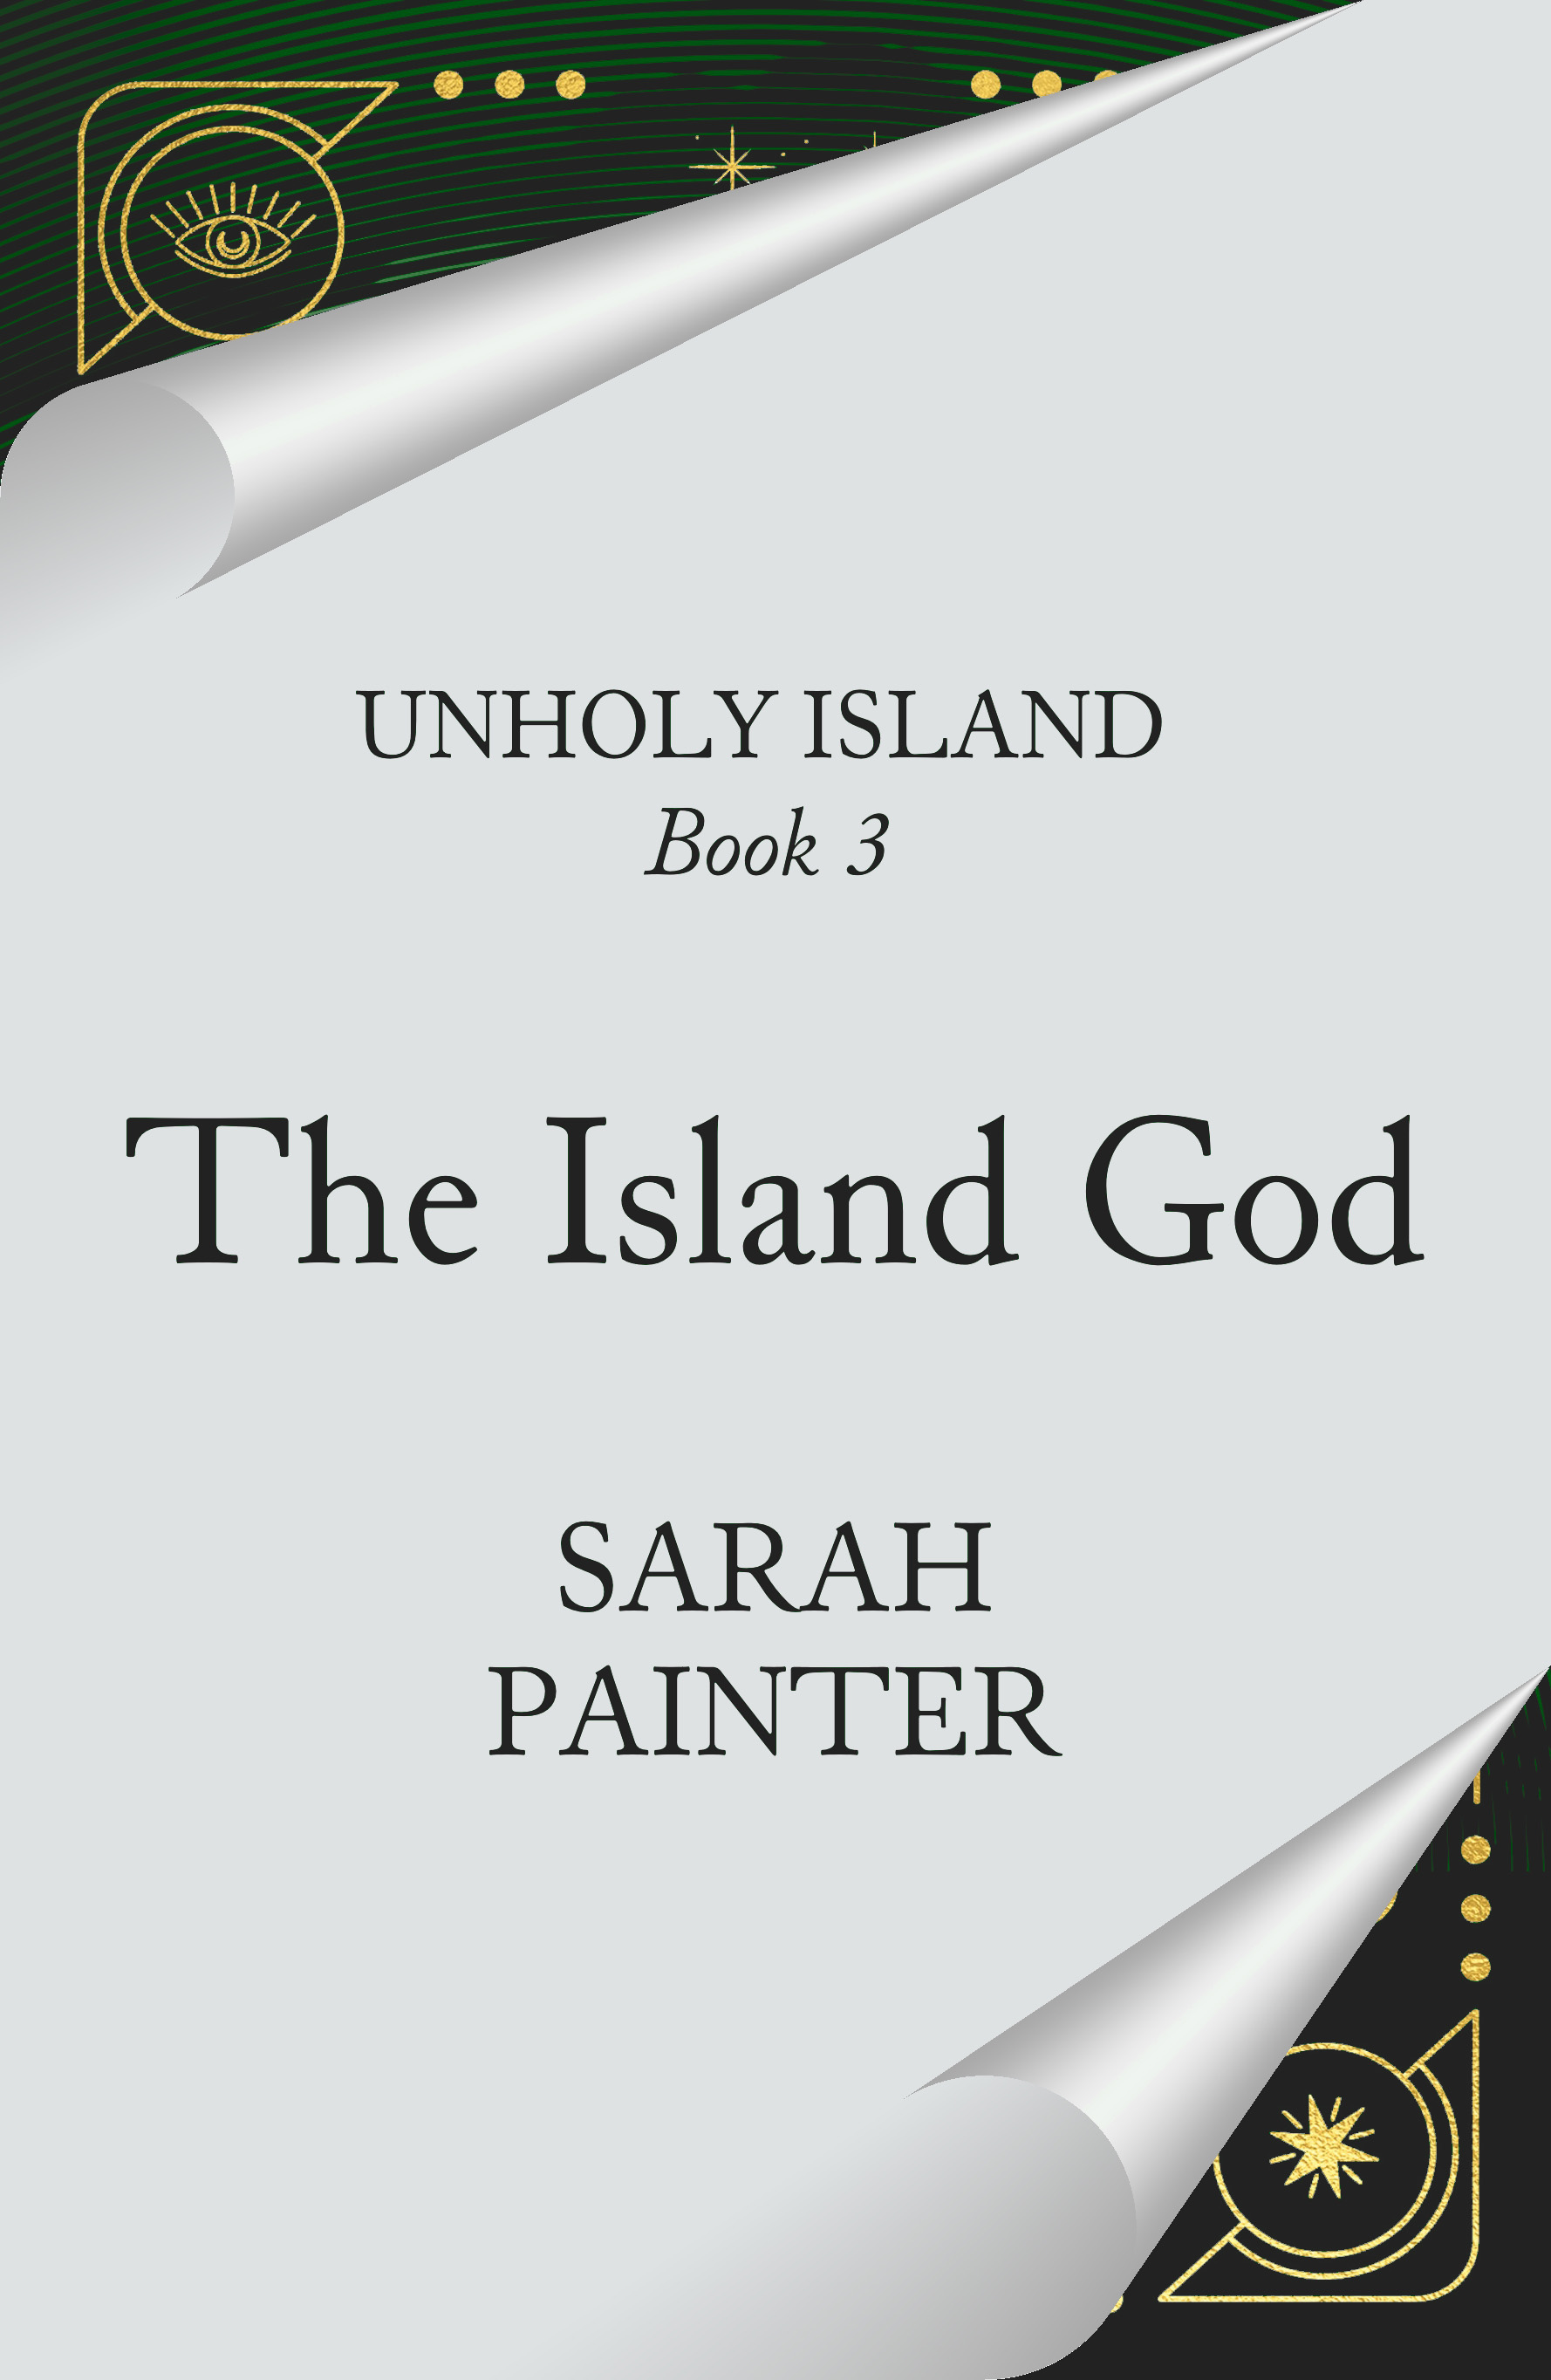 Unholy Island Book 3 is up for pre-order!